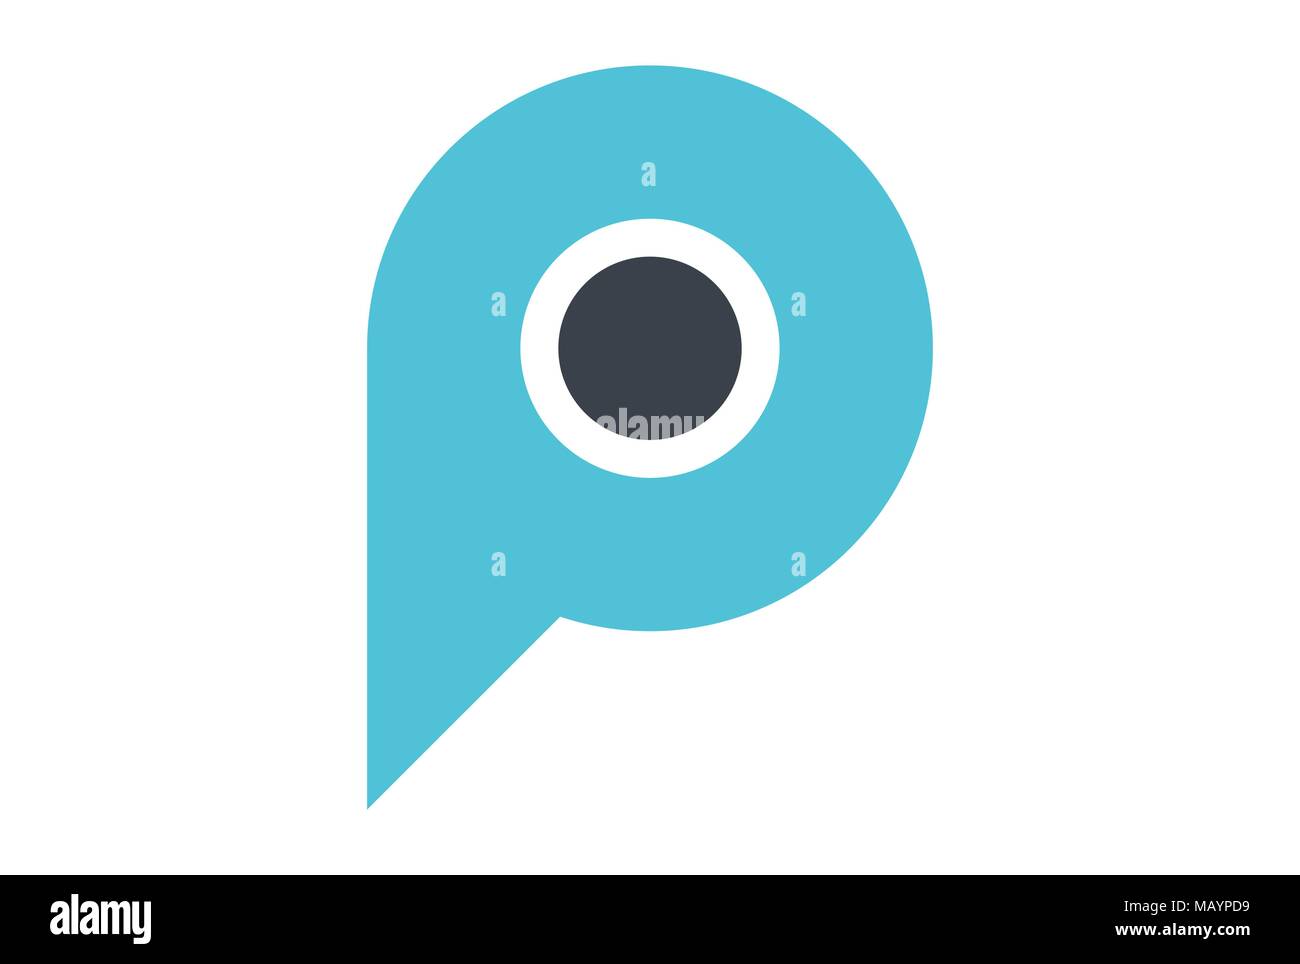 letter P vision logo icon Stock Vector